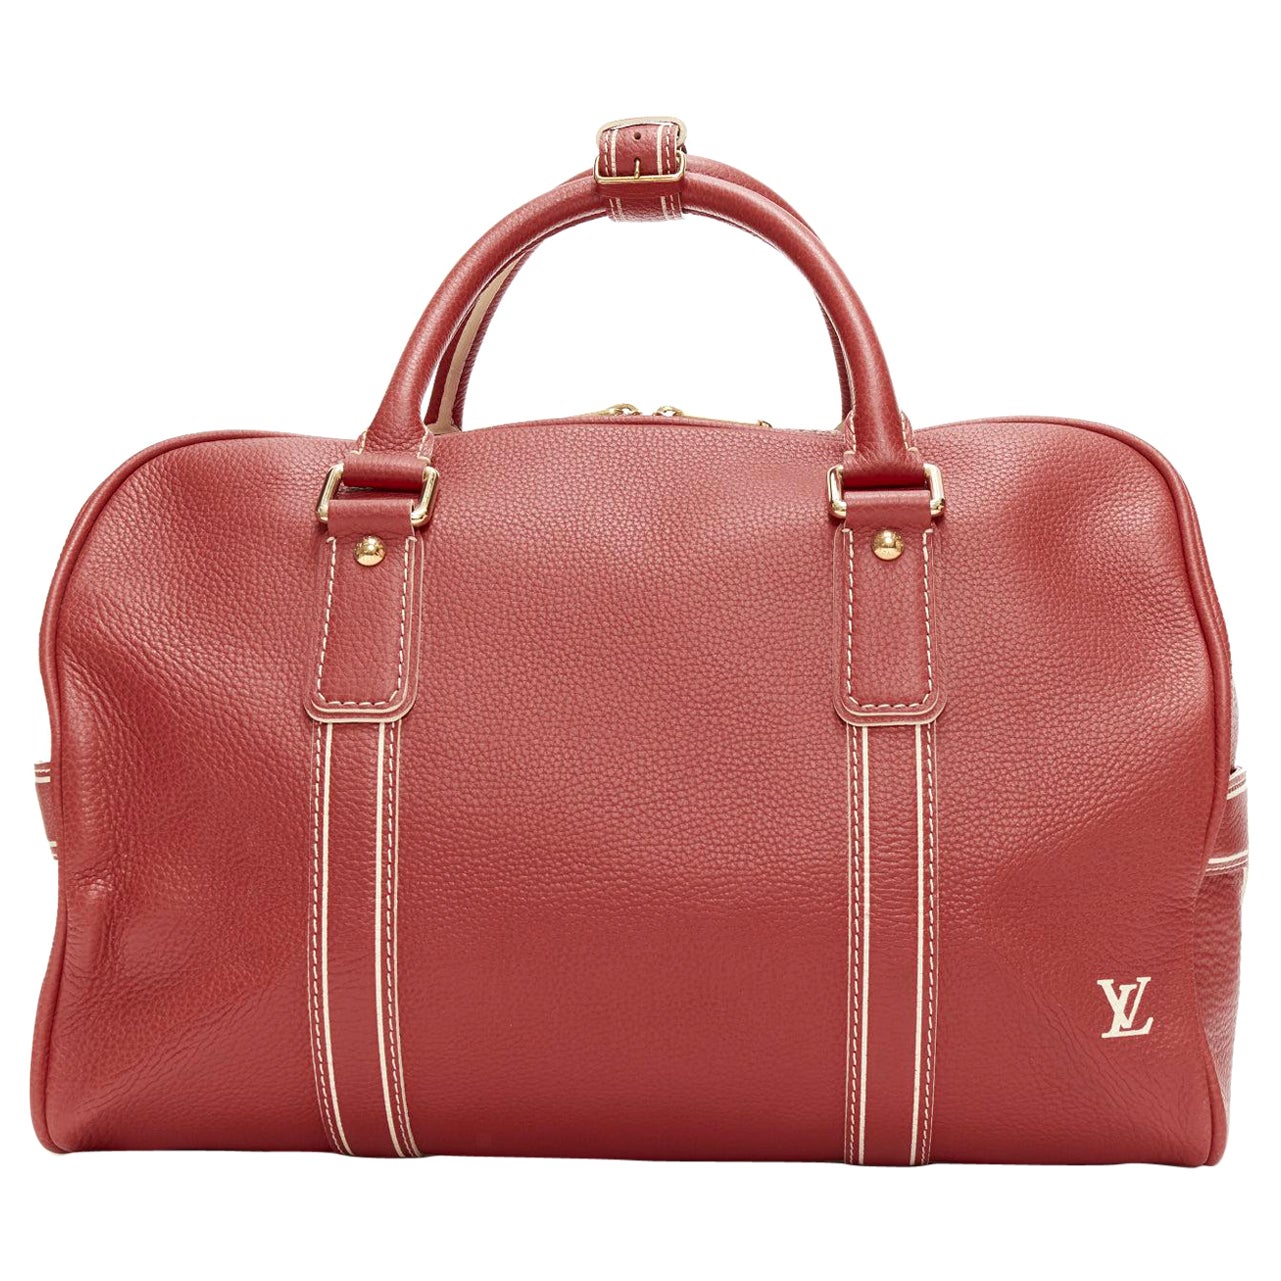 LOUIS VUITTON Red Tobaco Leather Carryall Boston Duffle top handle travel bag For Sale